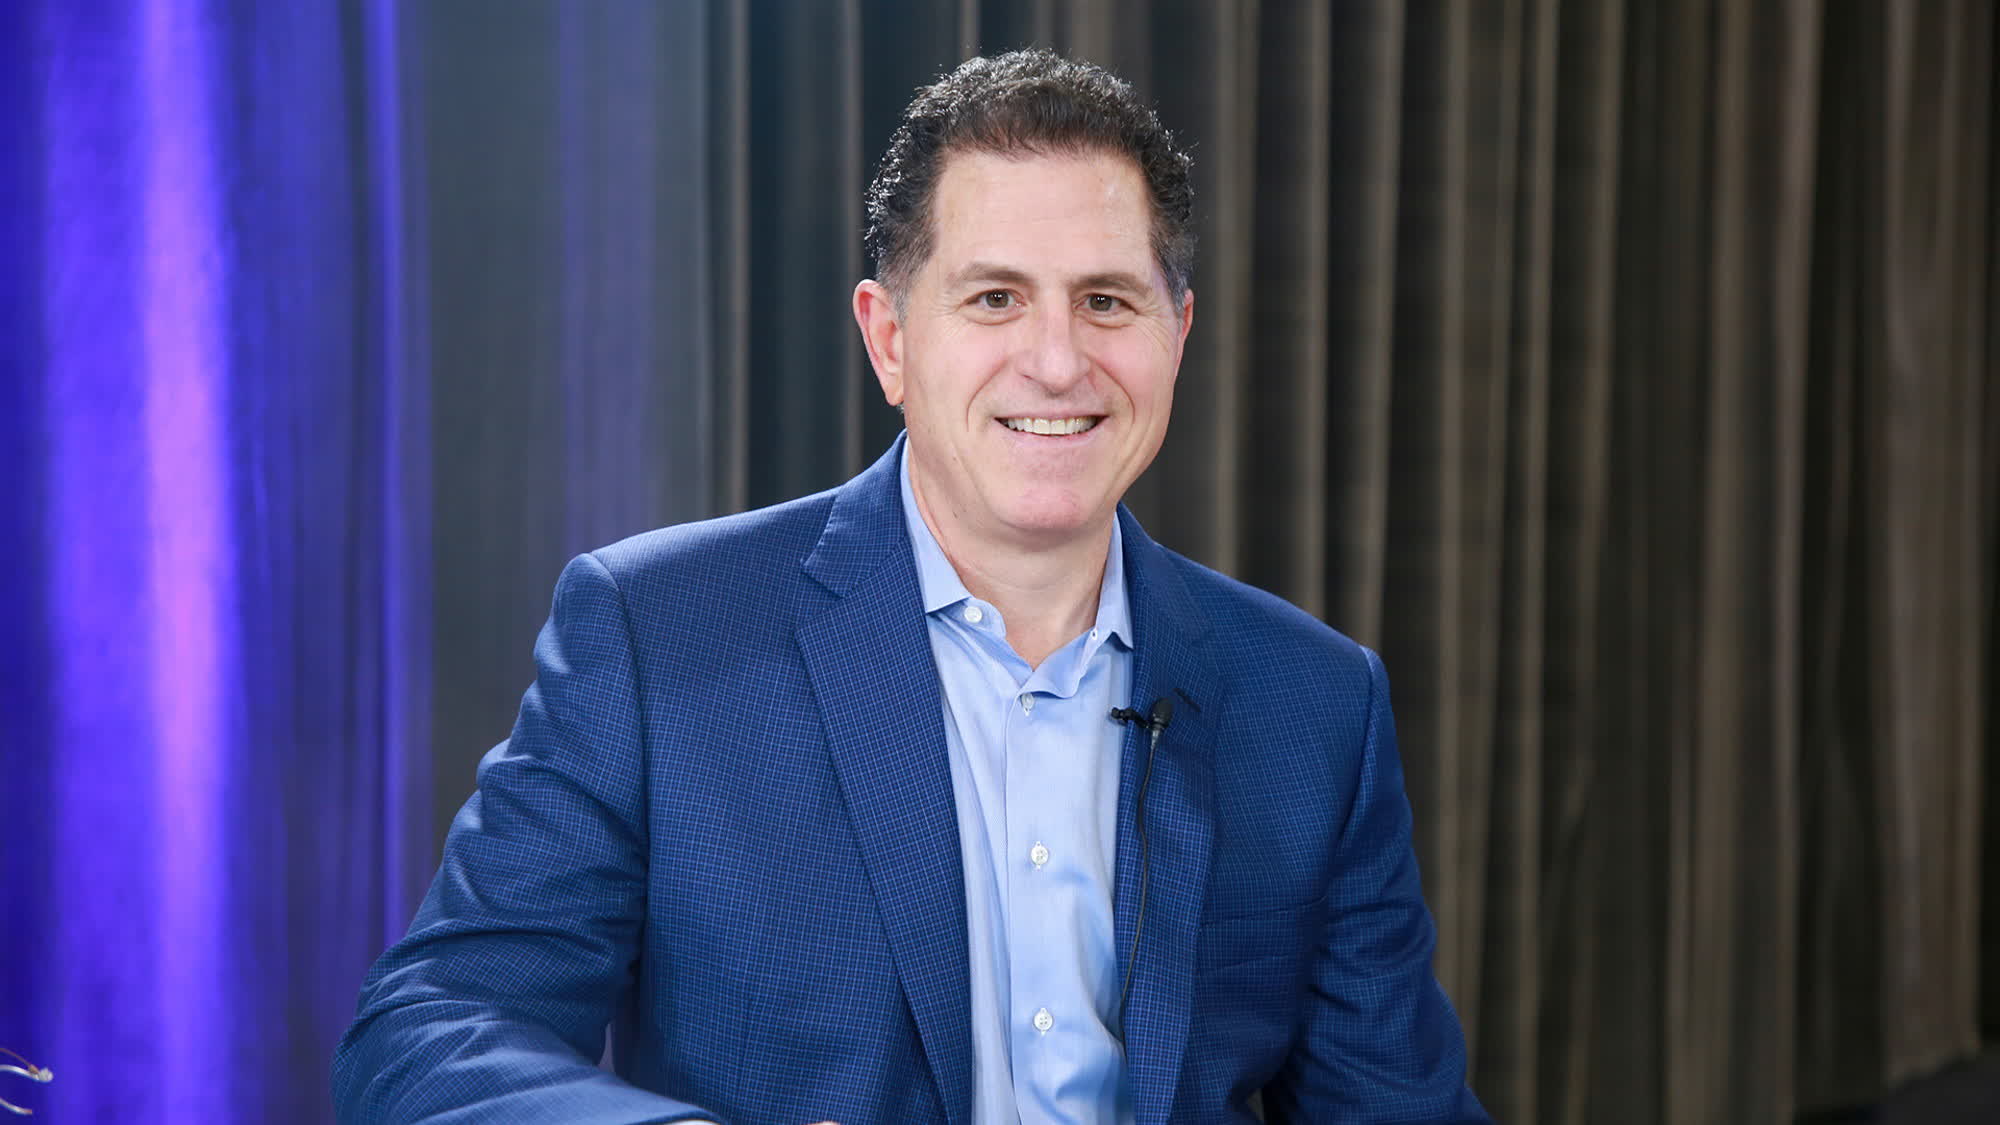 Michael Dell, the 15th richest person in the world, says you don't have to worry about AI